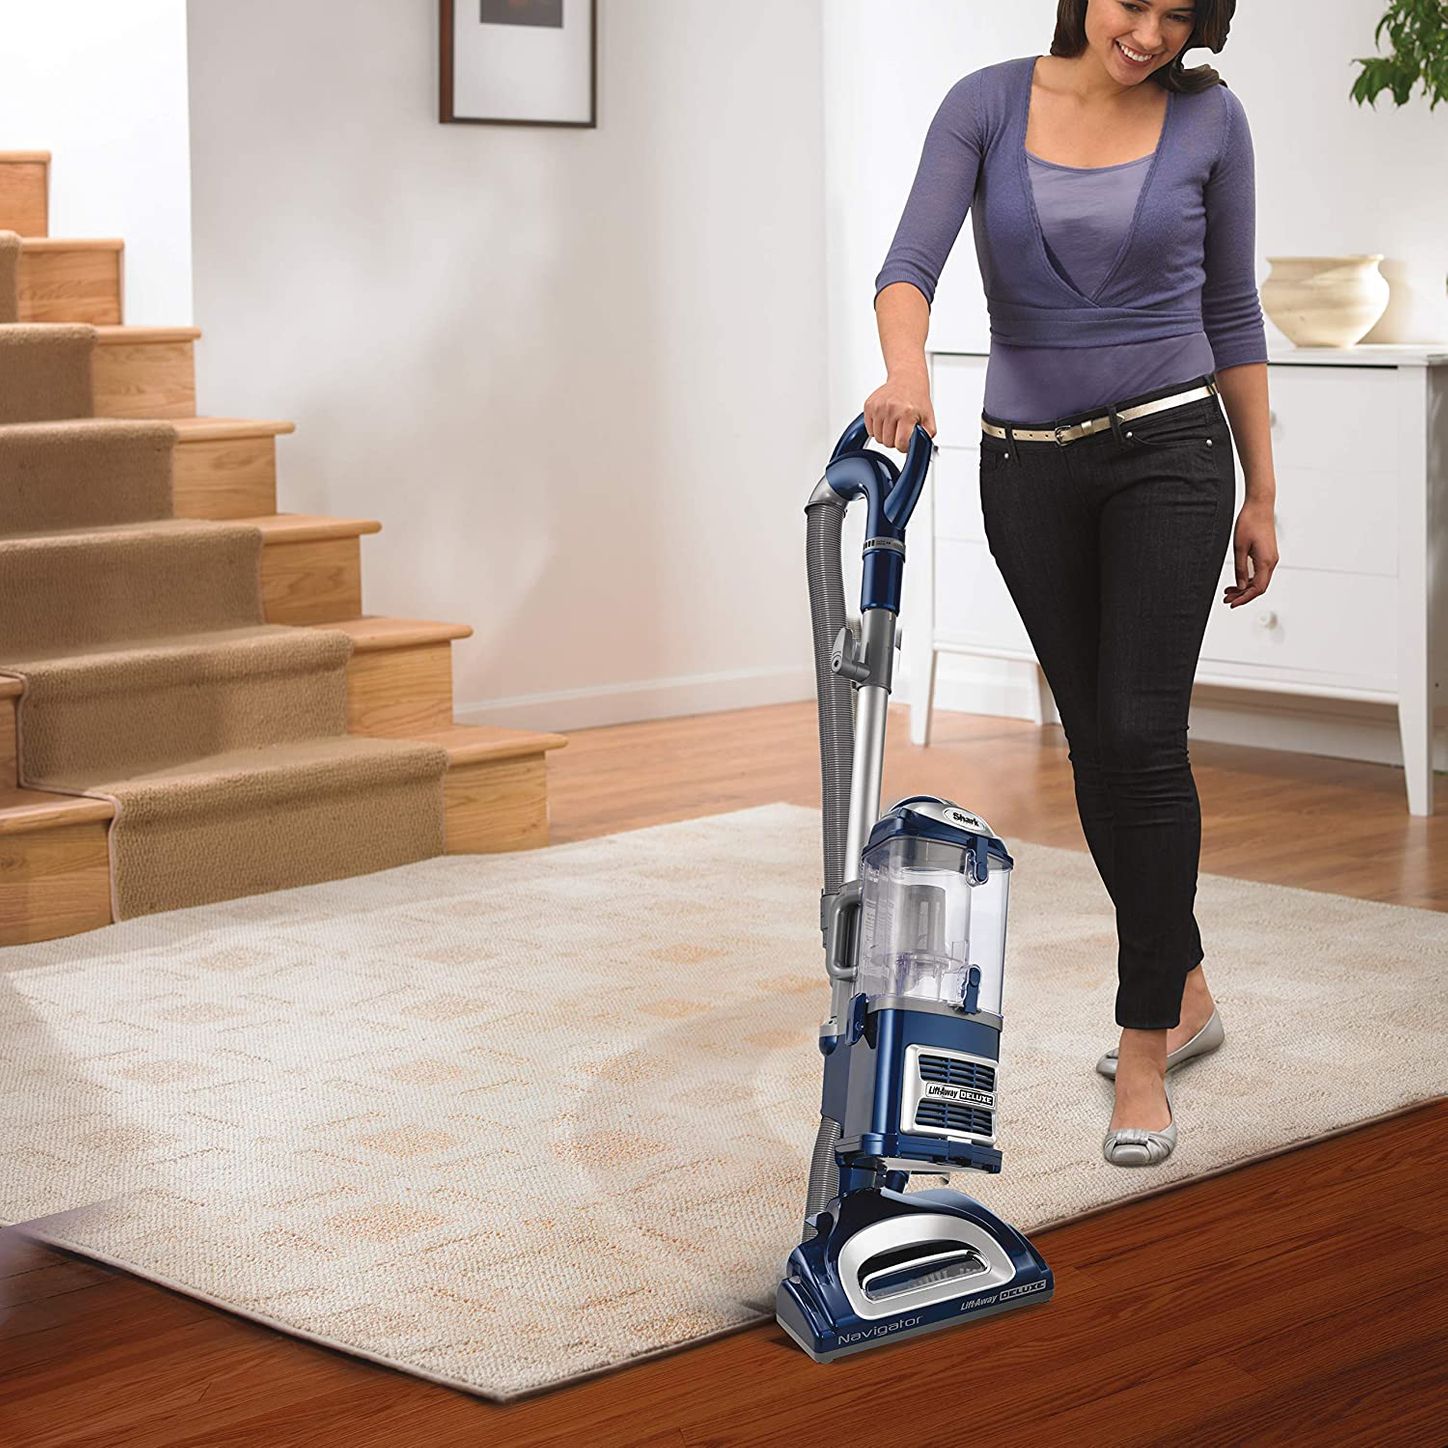 18 Best Vacuum Cleaners 2021 The, Best Vacuum Cleaner For Hardwood Floors And Pets